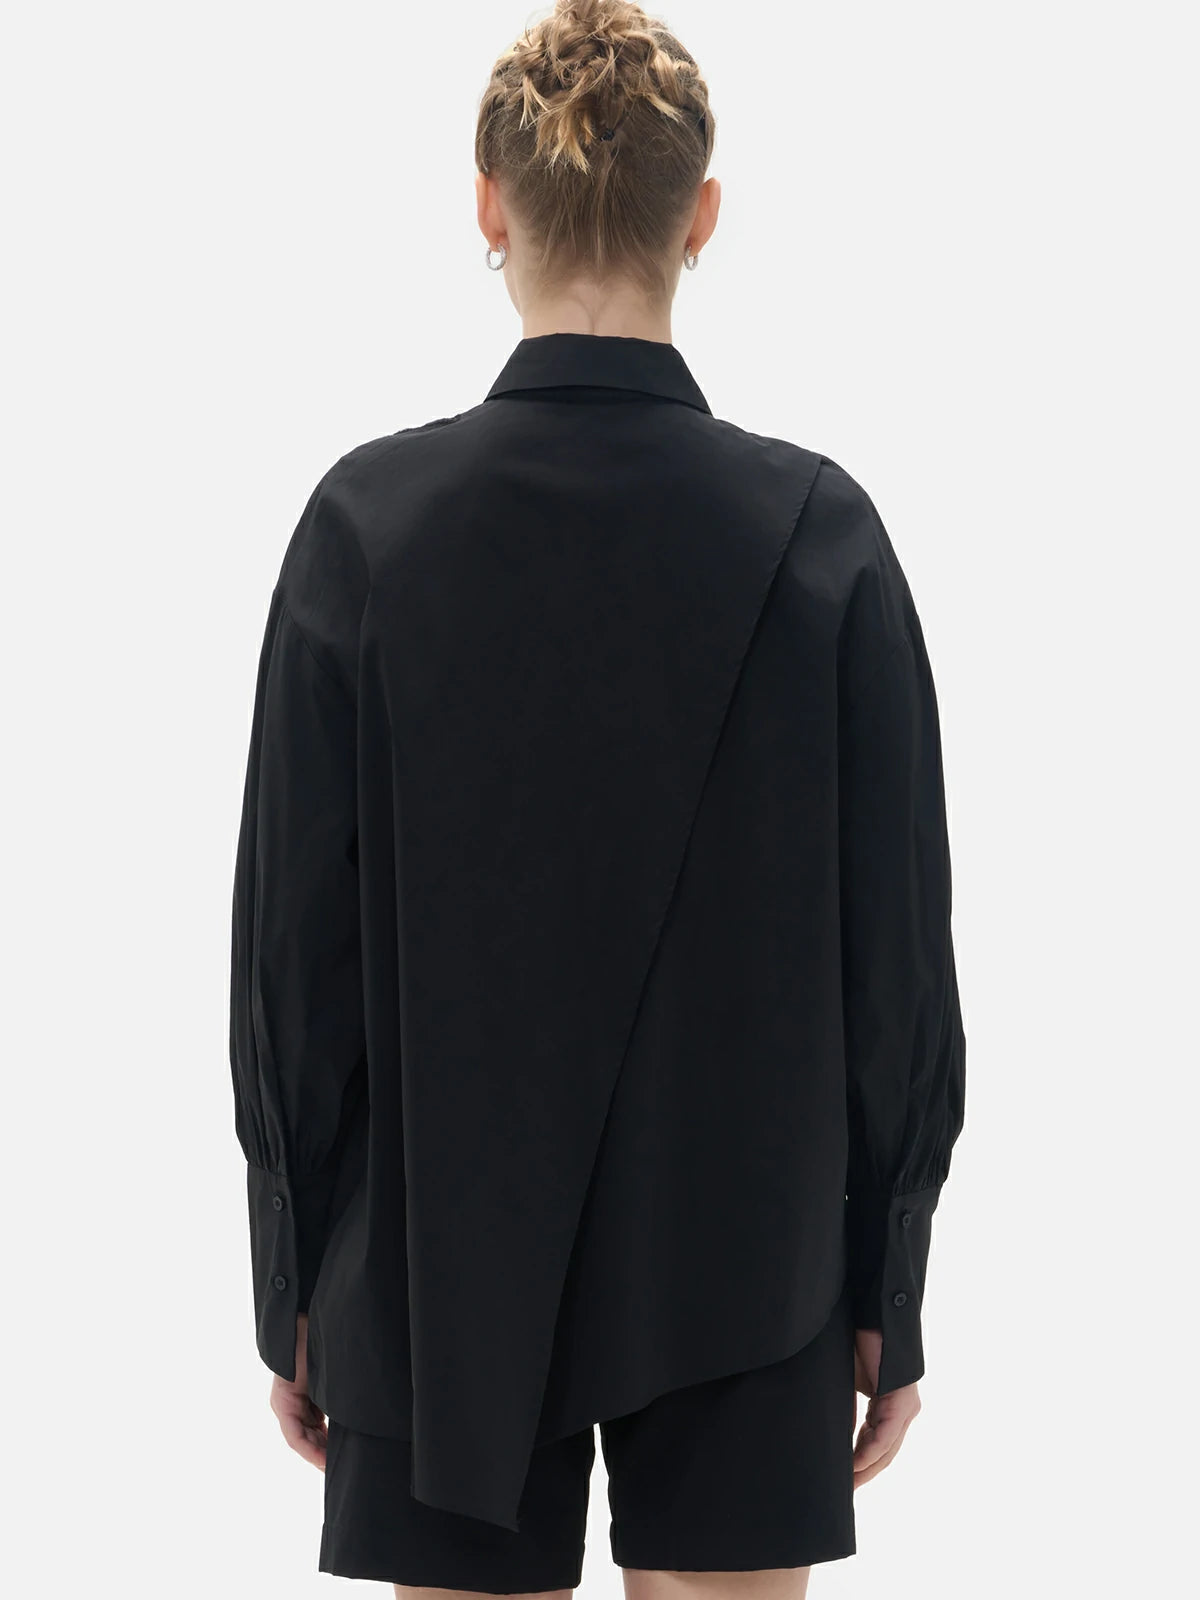 Uniquely designed black shirt with an front irregular cut, back slit, and diagonal button closure.